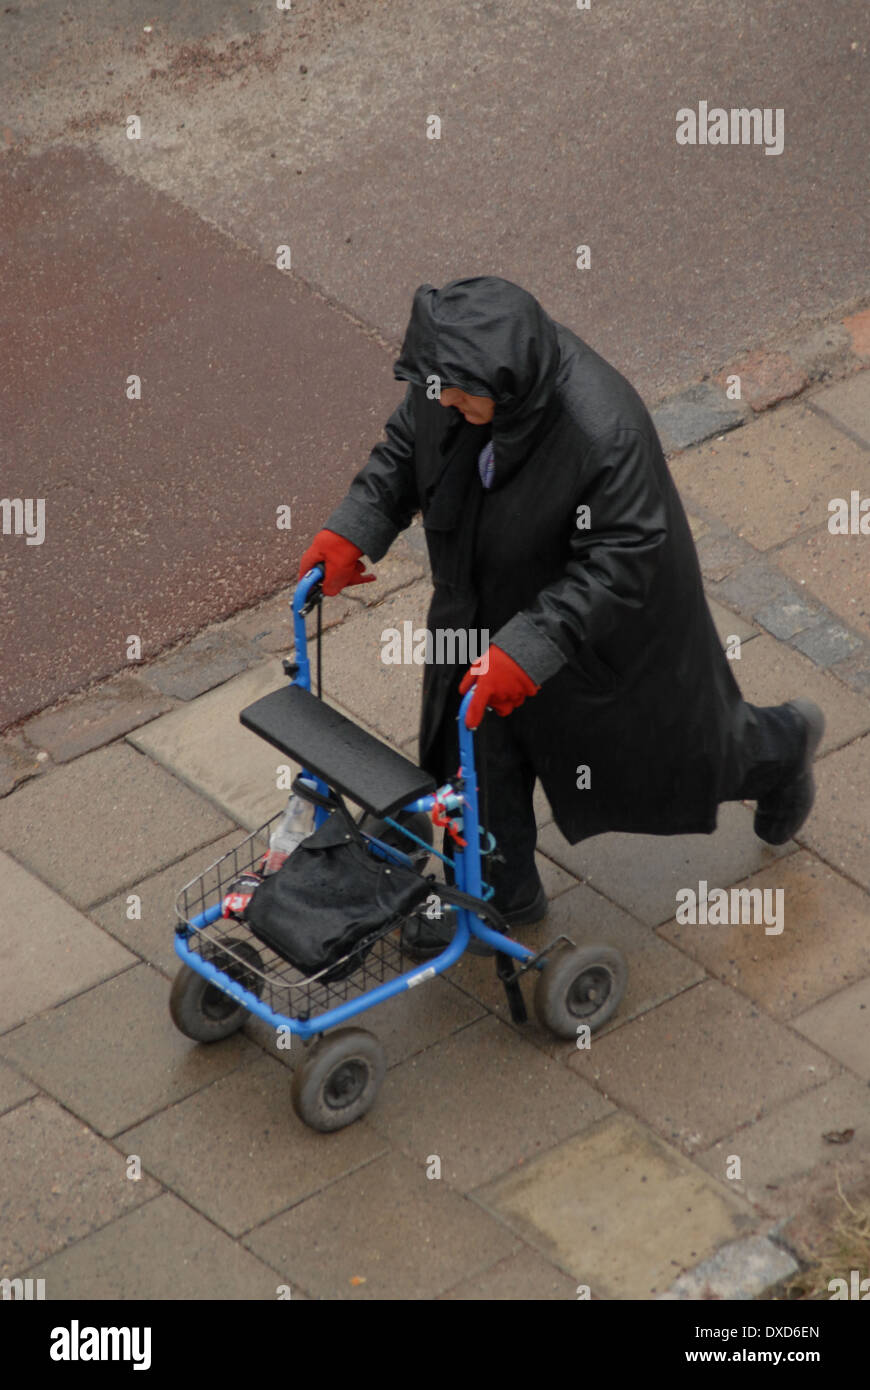 Walking with zimmer frame in rain. Stock Photo